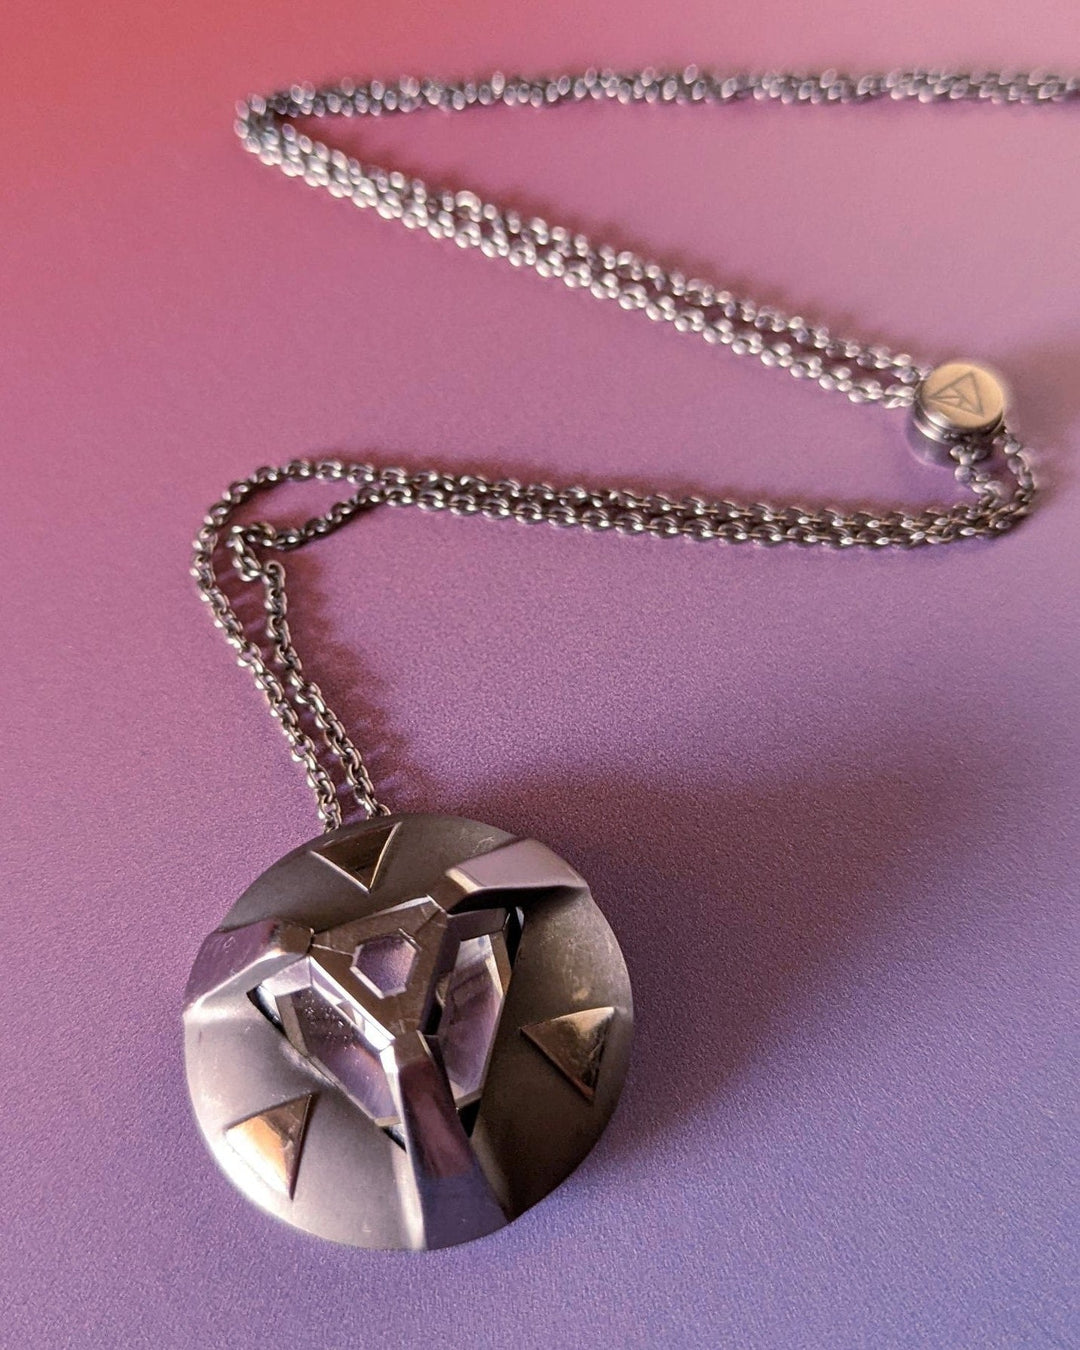 A wearable crystal pendant on a chain necklace